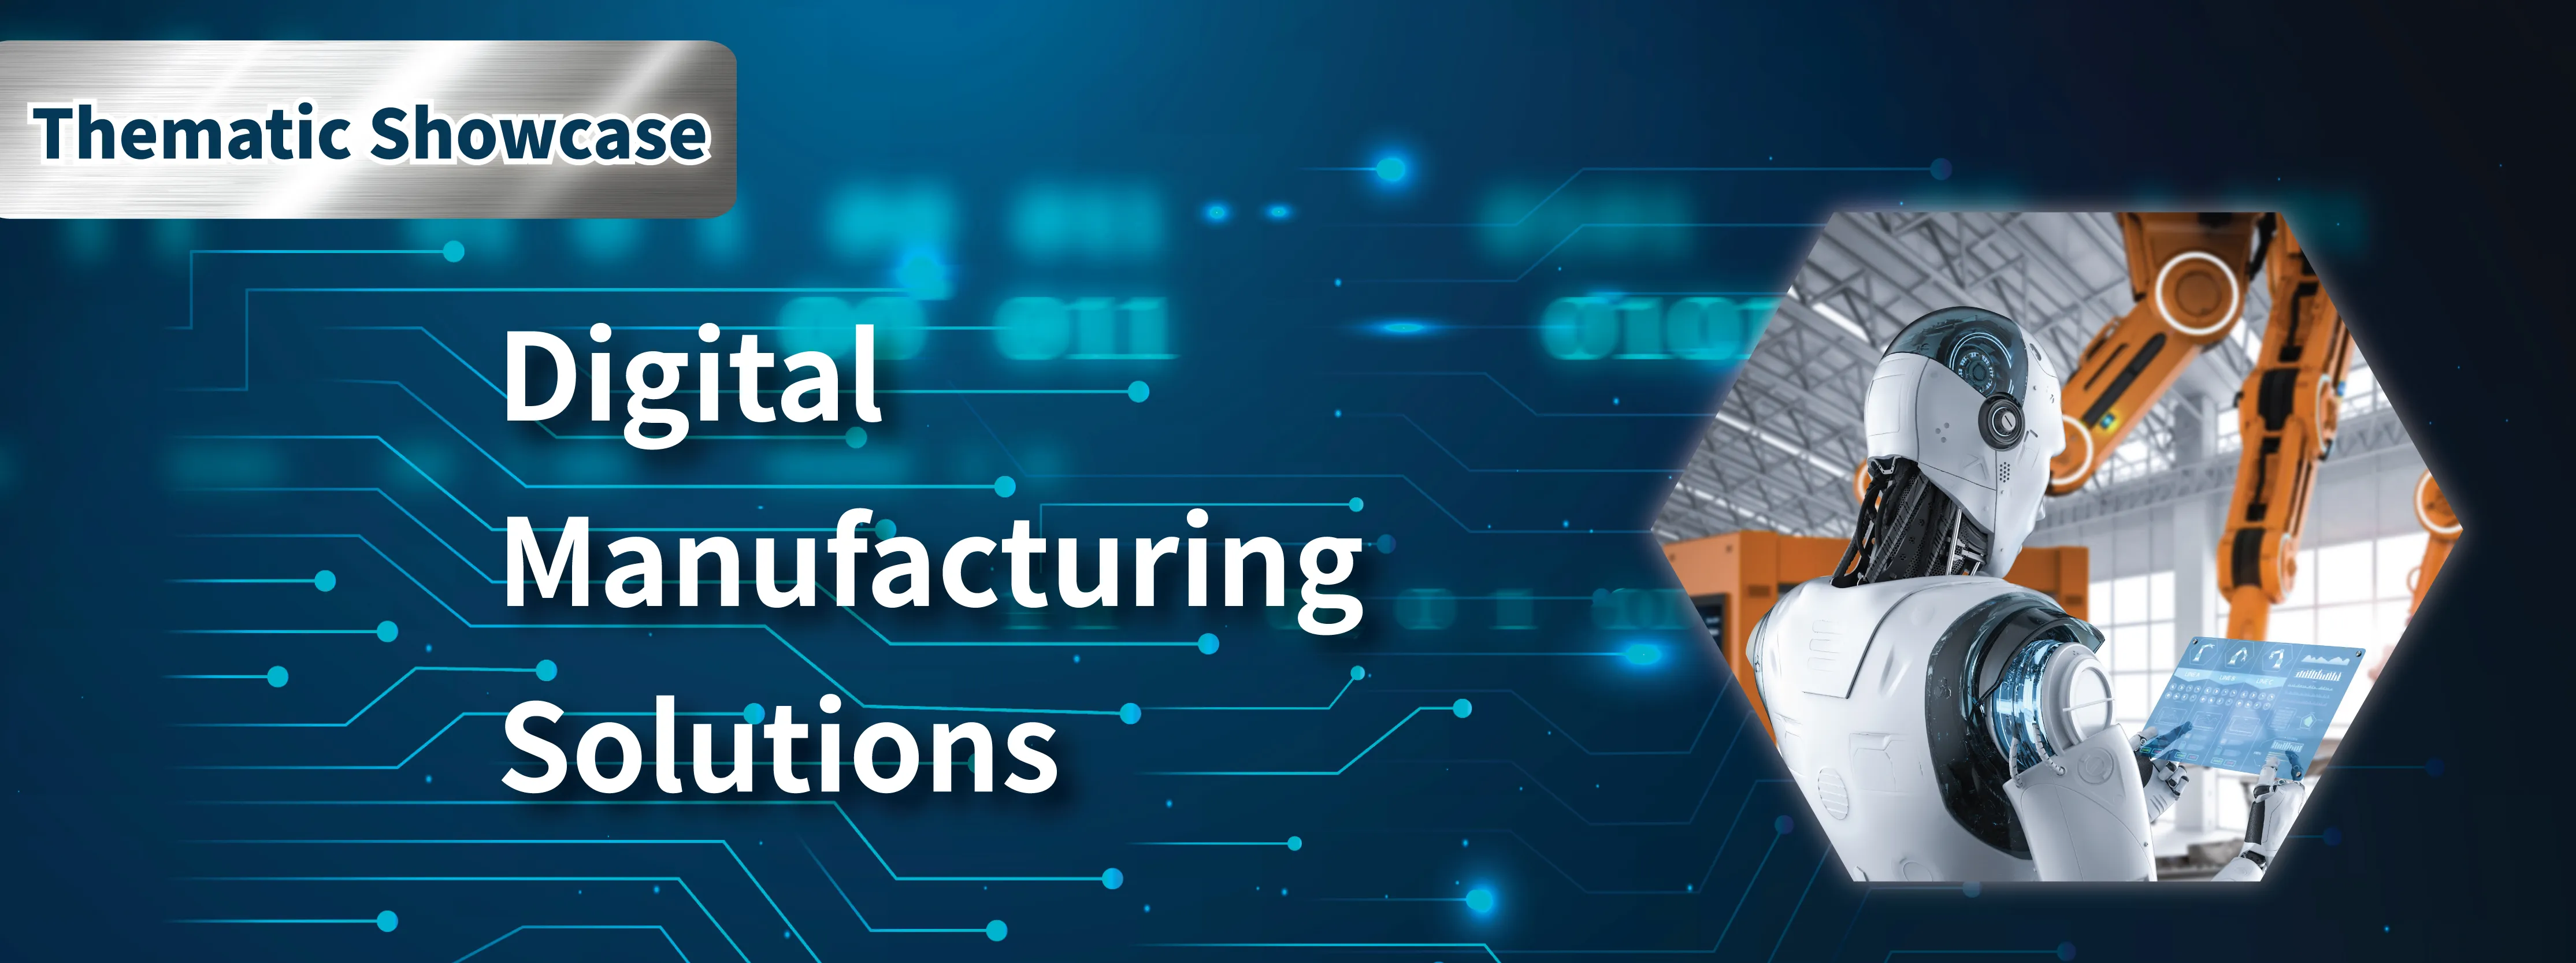 Digital Manufacturing Solutions